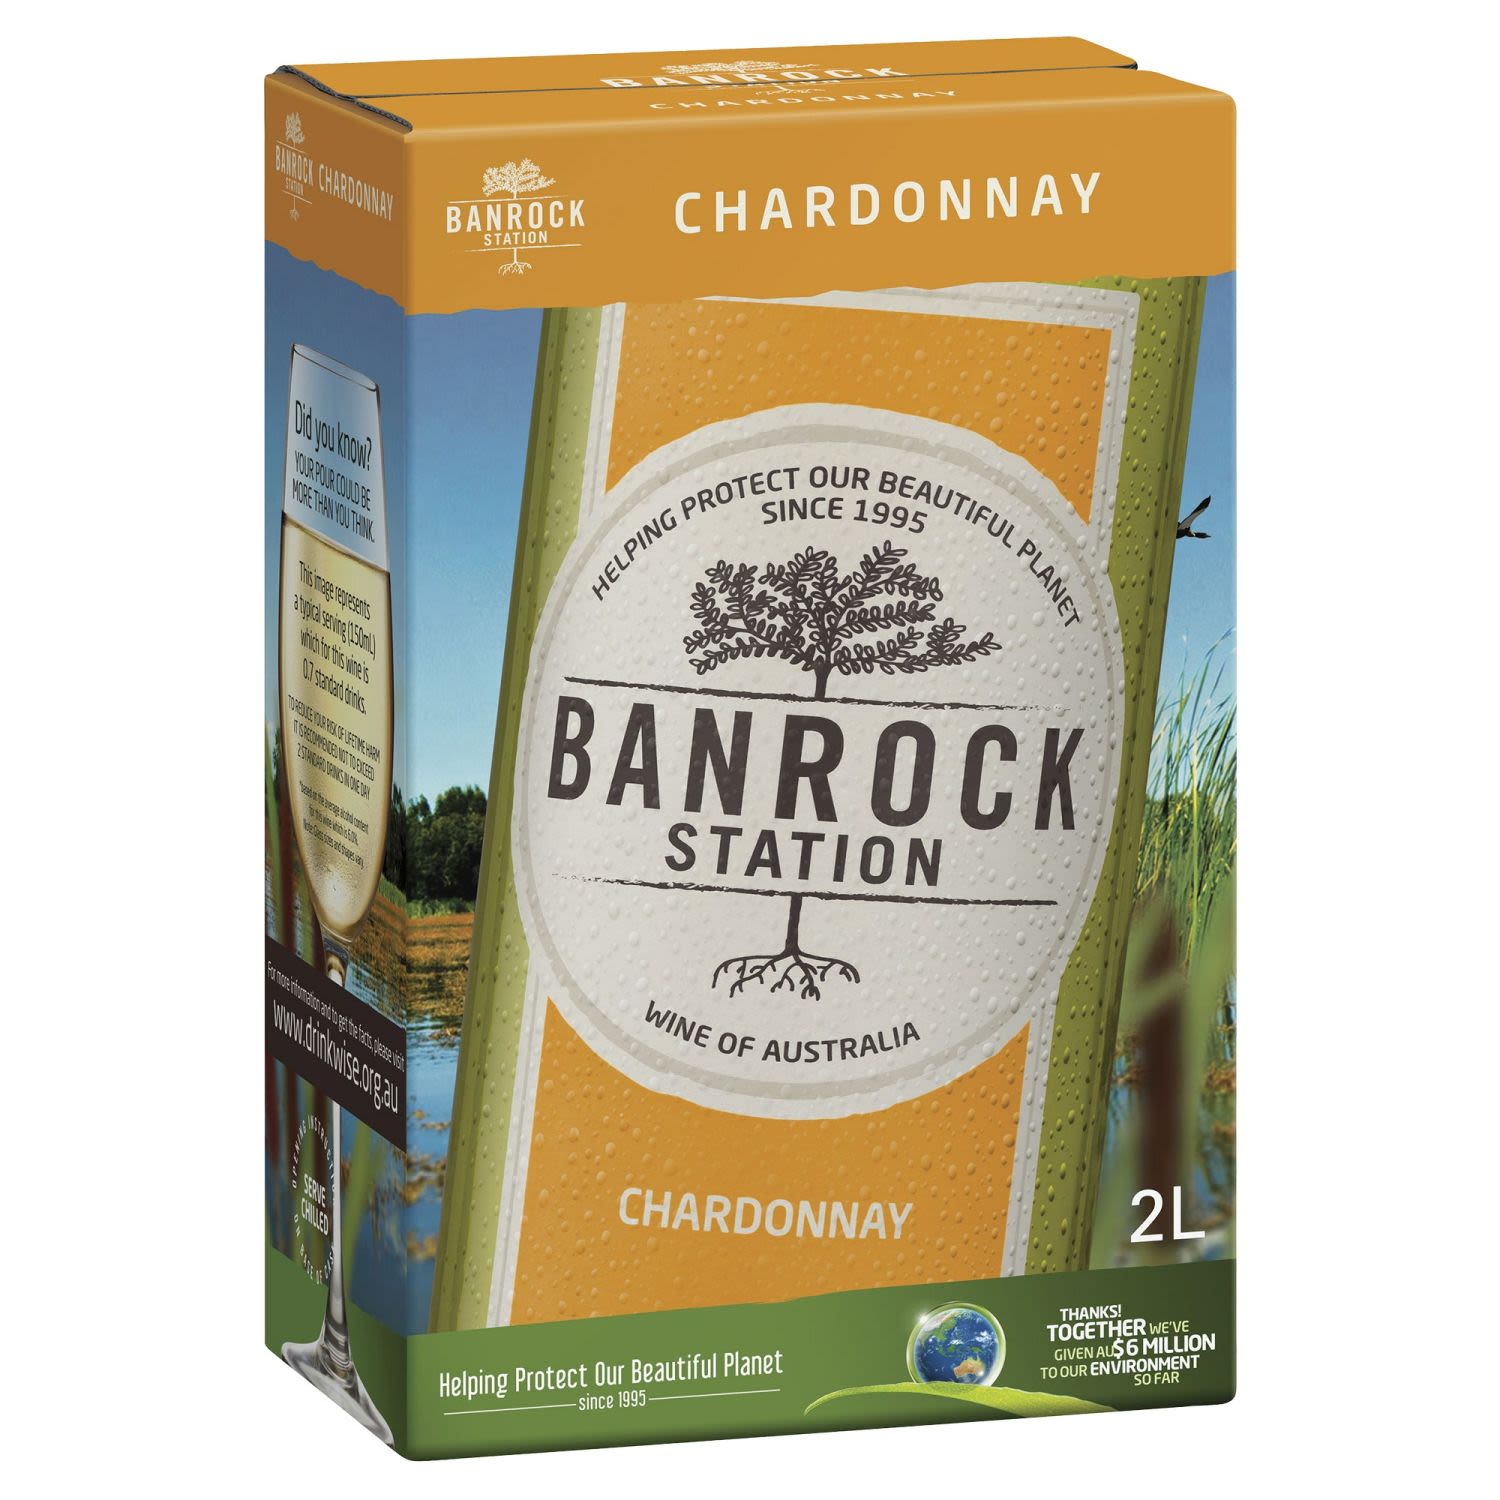 Banrock Station Chardonnay Cask 2L is a classic Australian Chardonnay with a rich creamy palate showing peach and melon and a full, round finish.<br /> <br />Alcohol Volume: 13.00%<br /><br />Pack Format: Cask<br /><br />Standard Drinks: 21<br /><br />Pack Type: Cask<br /><br />Country of Origin: Australia<br /><br />Region: Riverland<br /><br />Vintage: Vintages Vary<br />